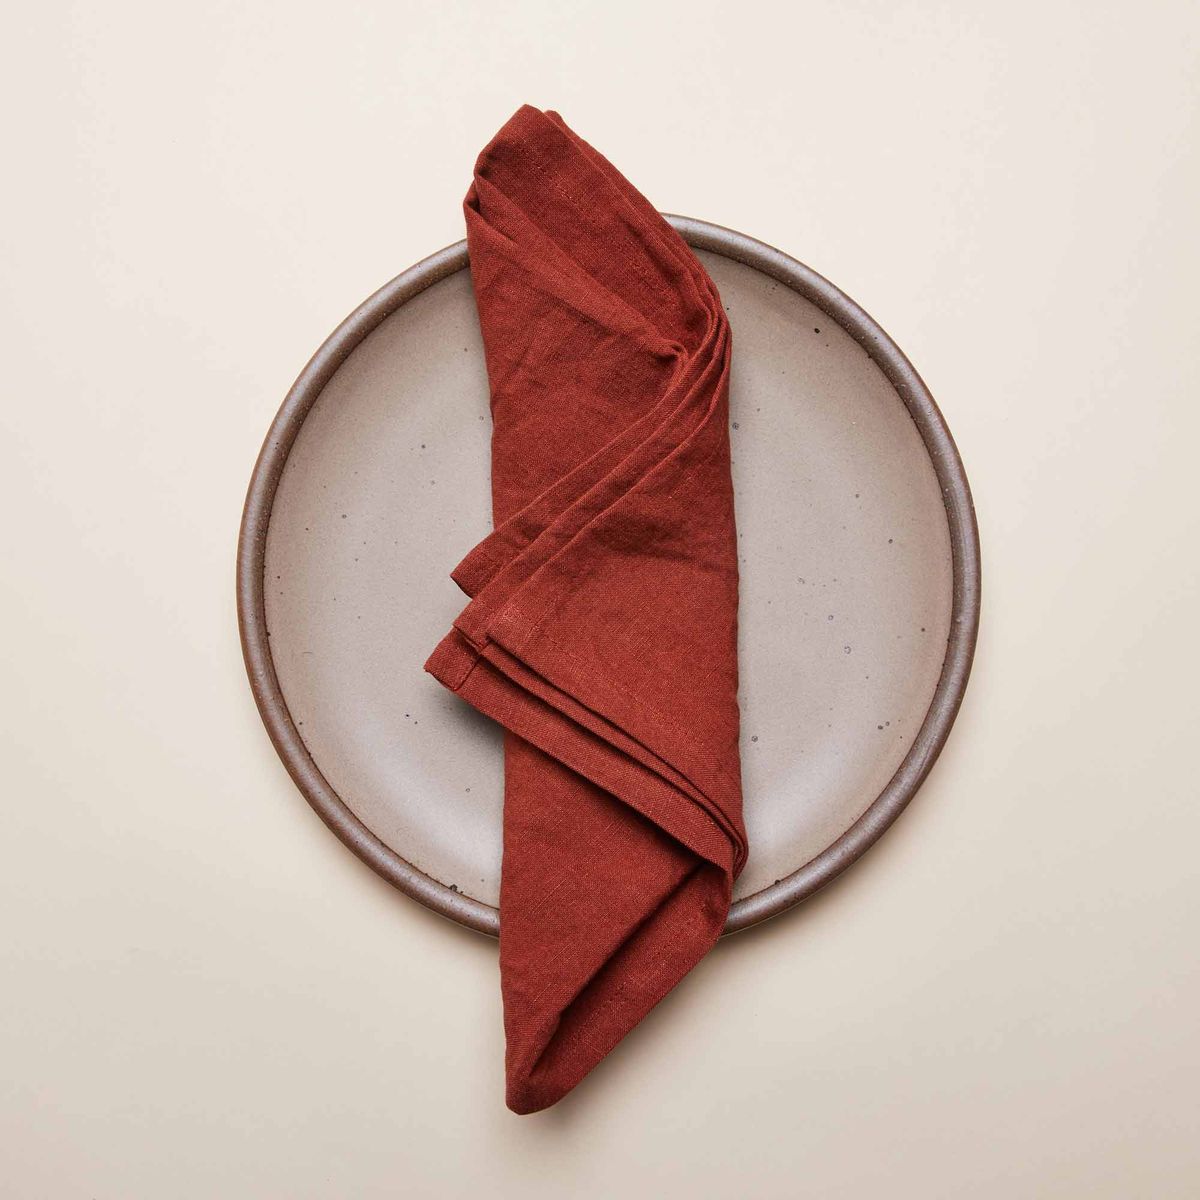 An East Fork Dinner Plate in Morel and an East Fork Linen Napkin in Amaro